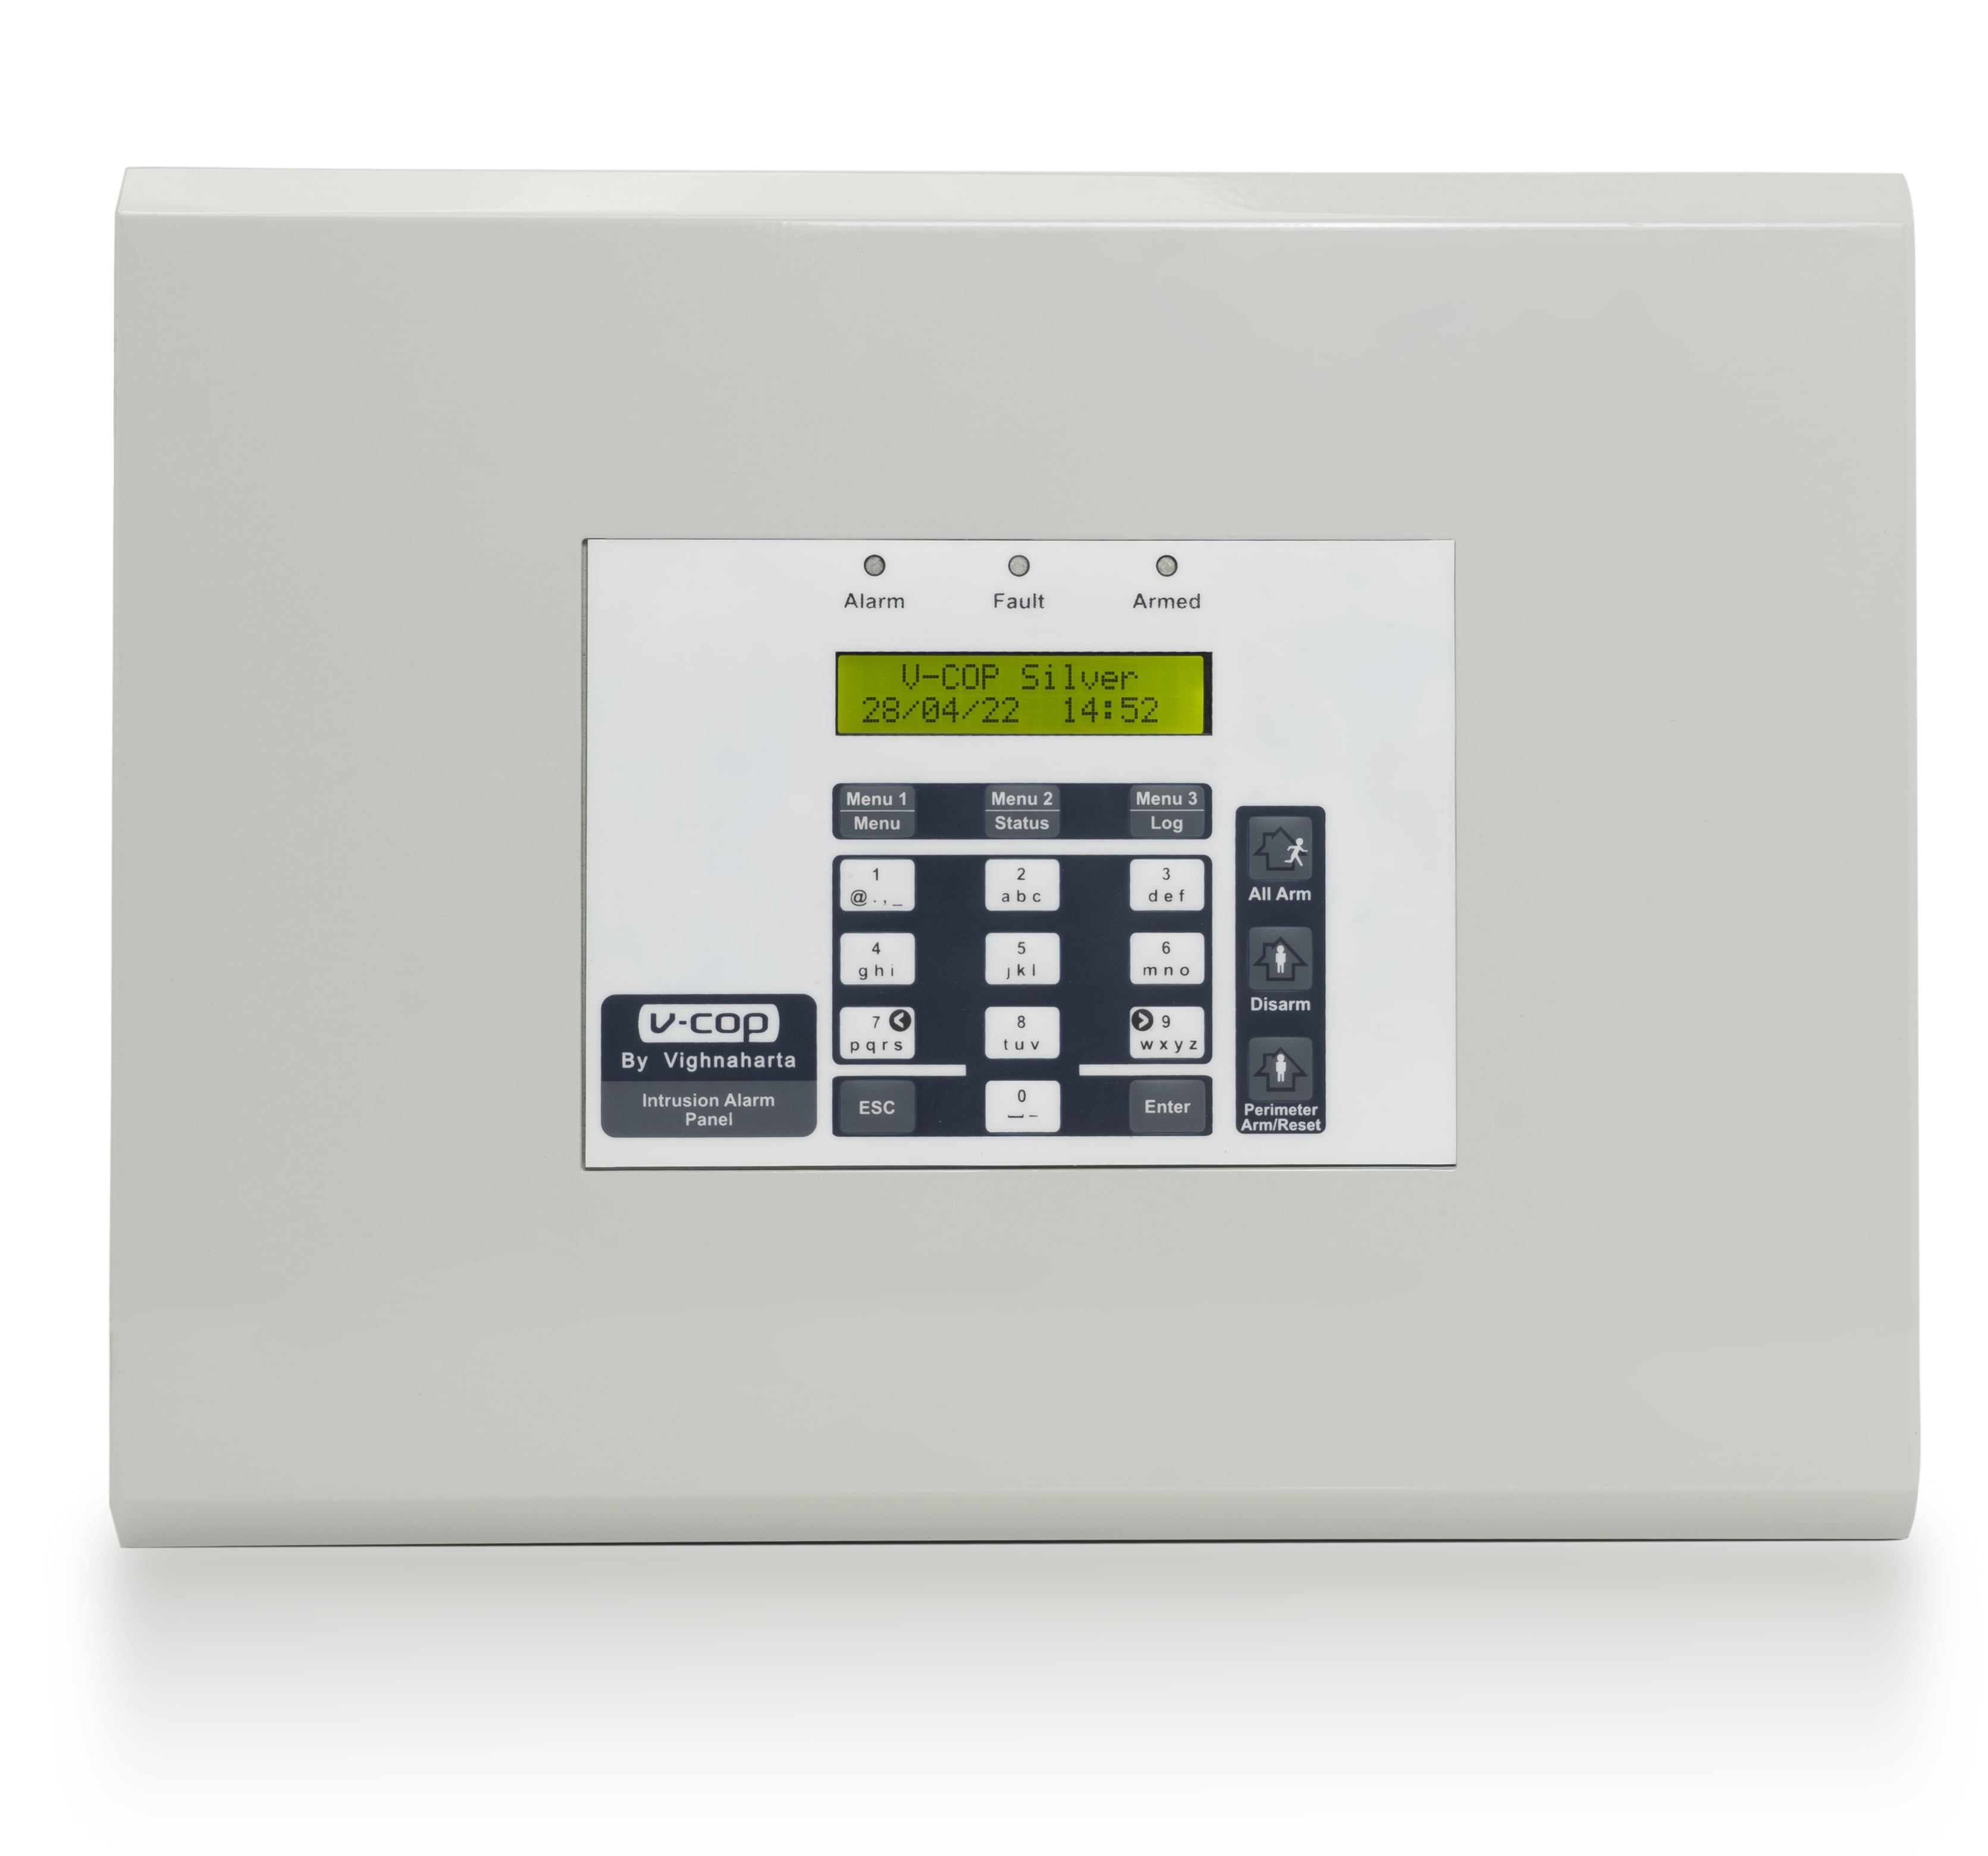 V-Cop Gold - Wired Panel
Intrusion Alarm System